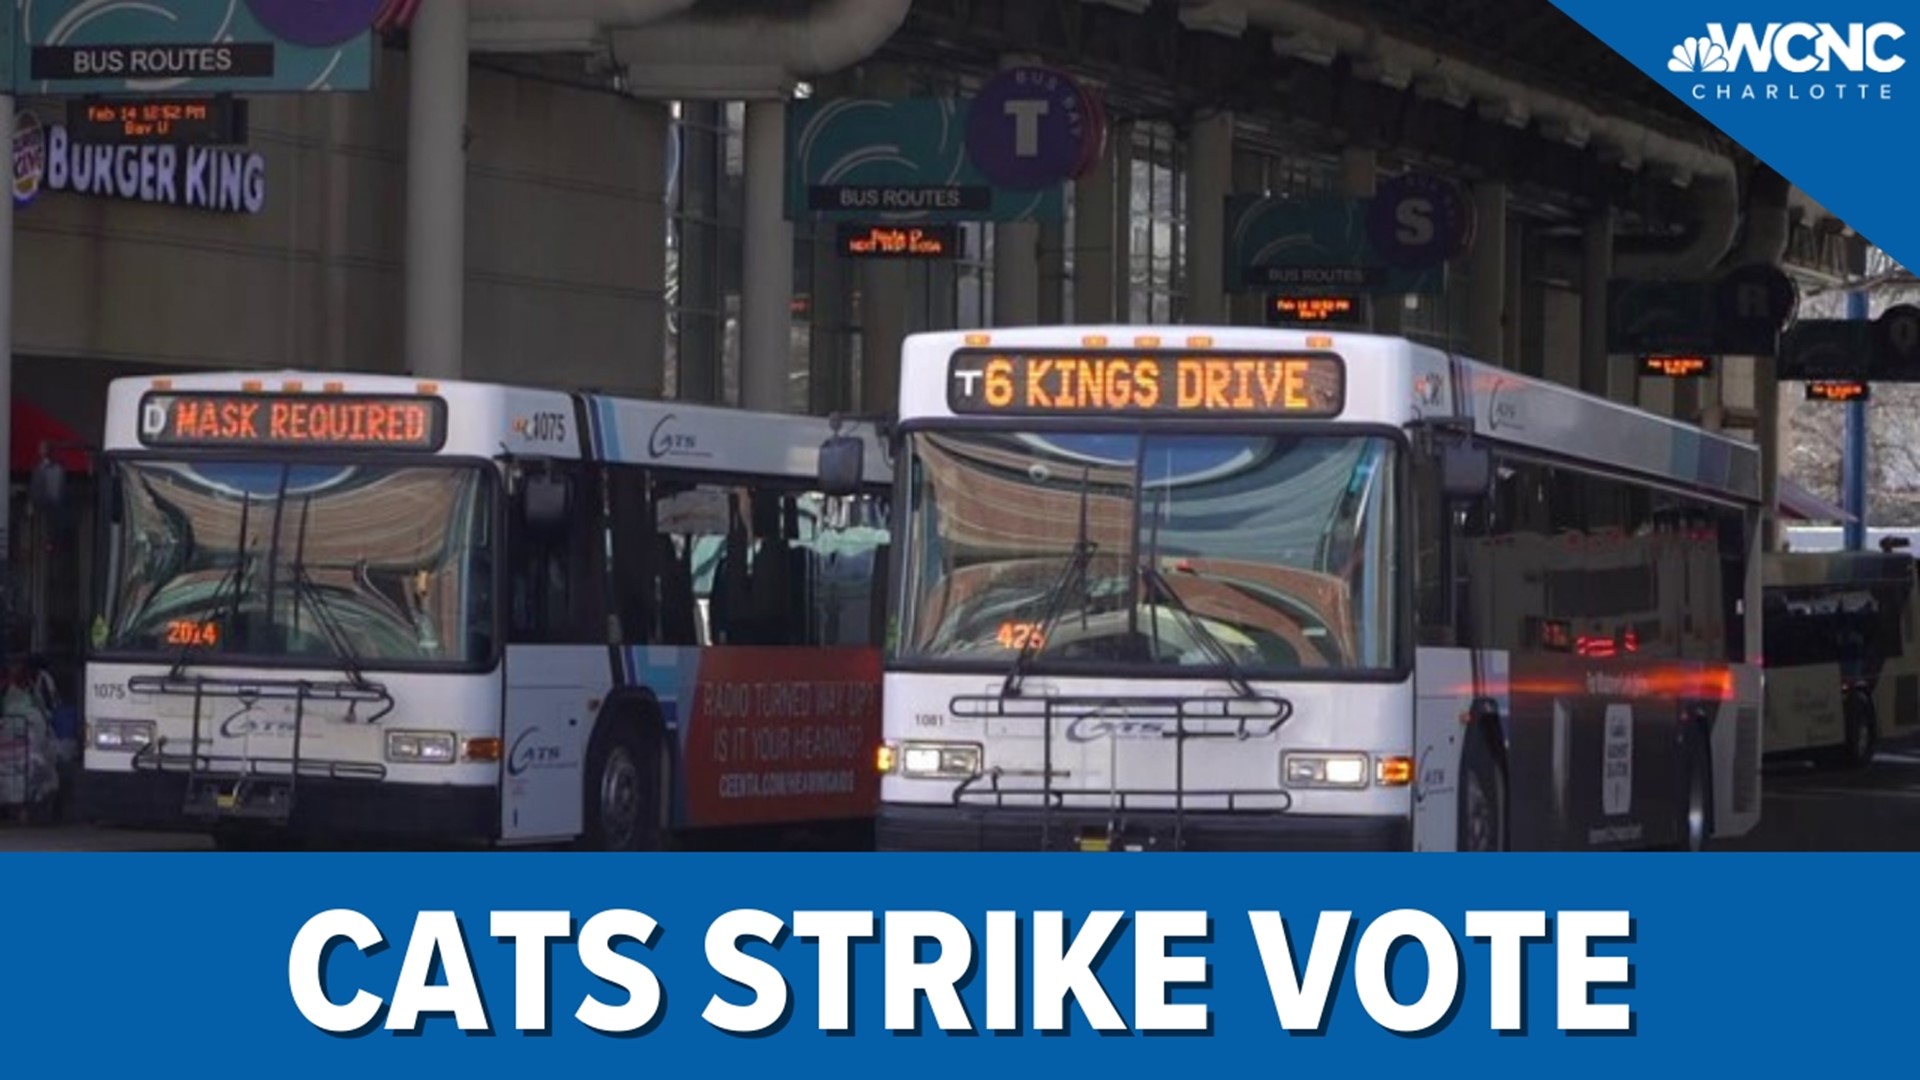 CATS provides 6.5 million rides a year on buses and rail systems. Those who ride the bus could be impacted if CATS transit workers choose to go on strike.